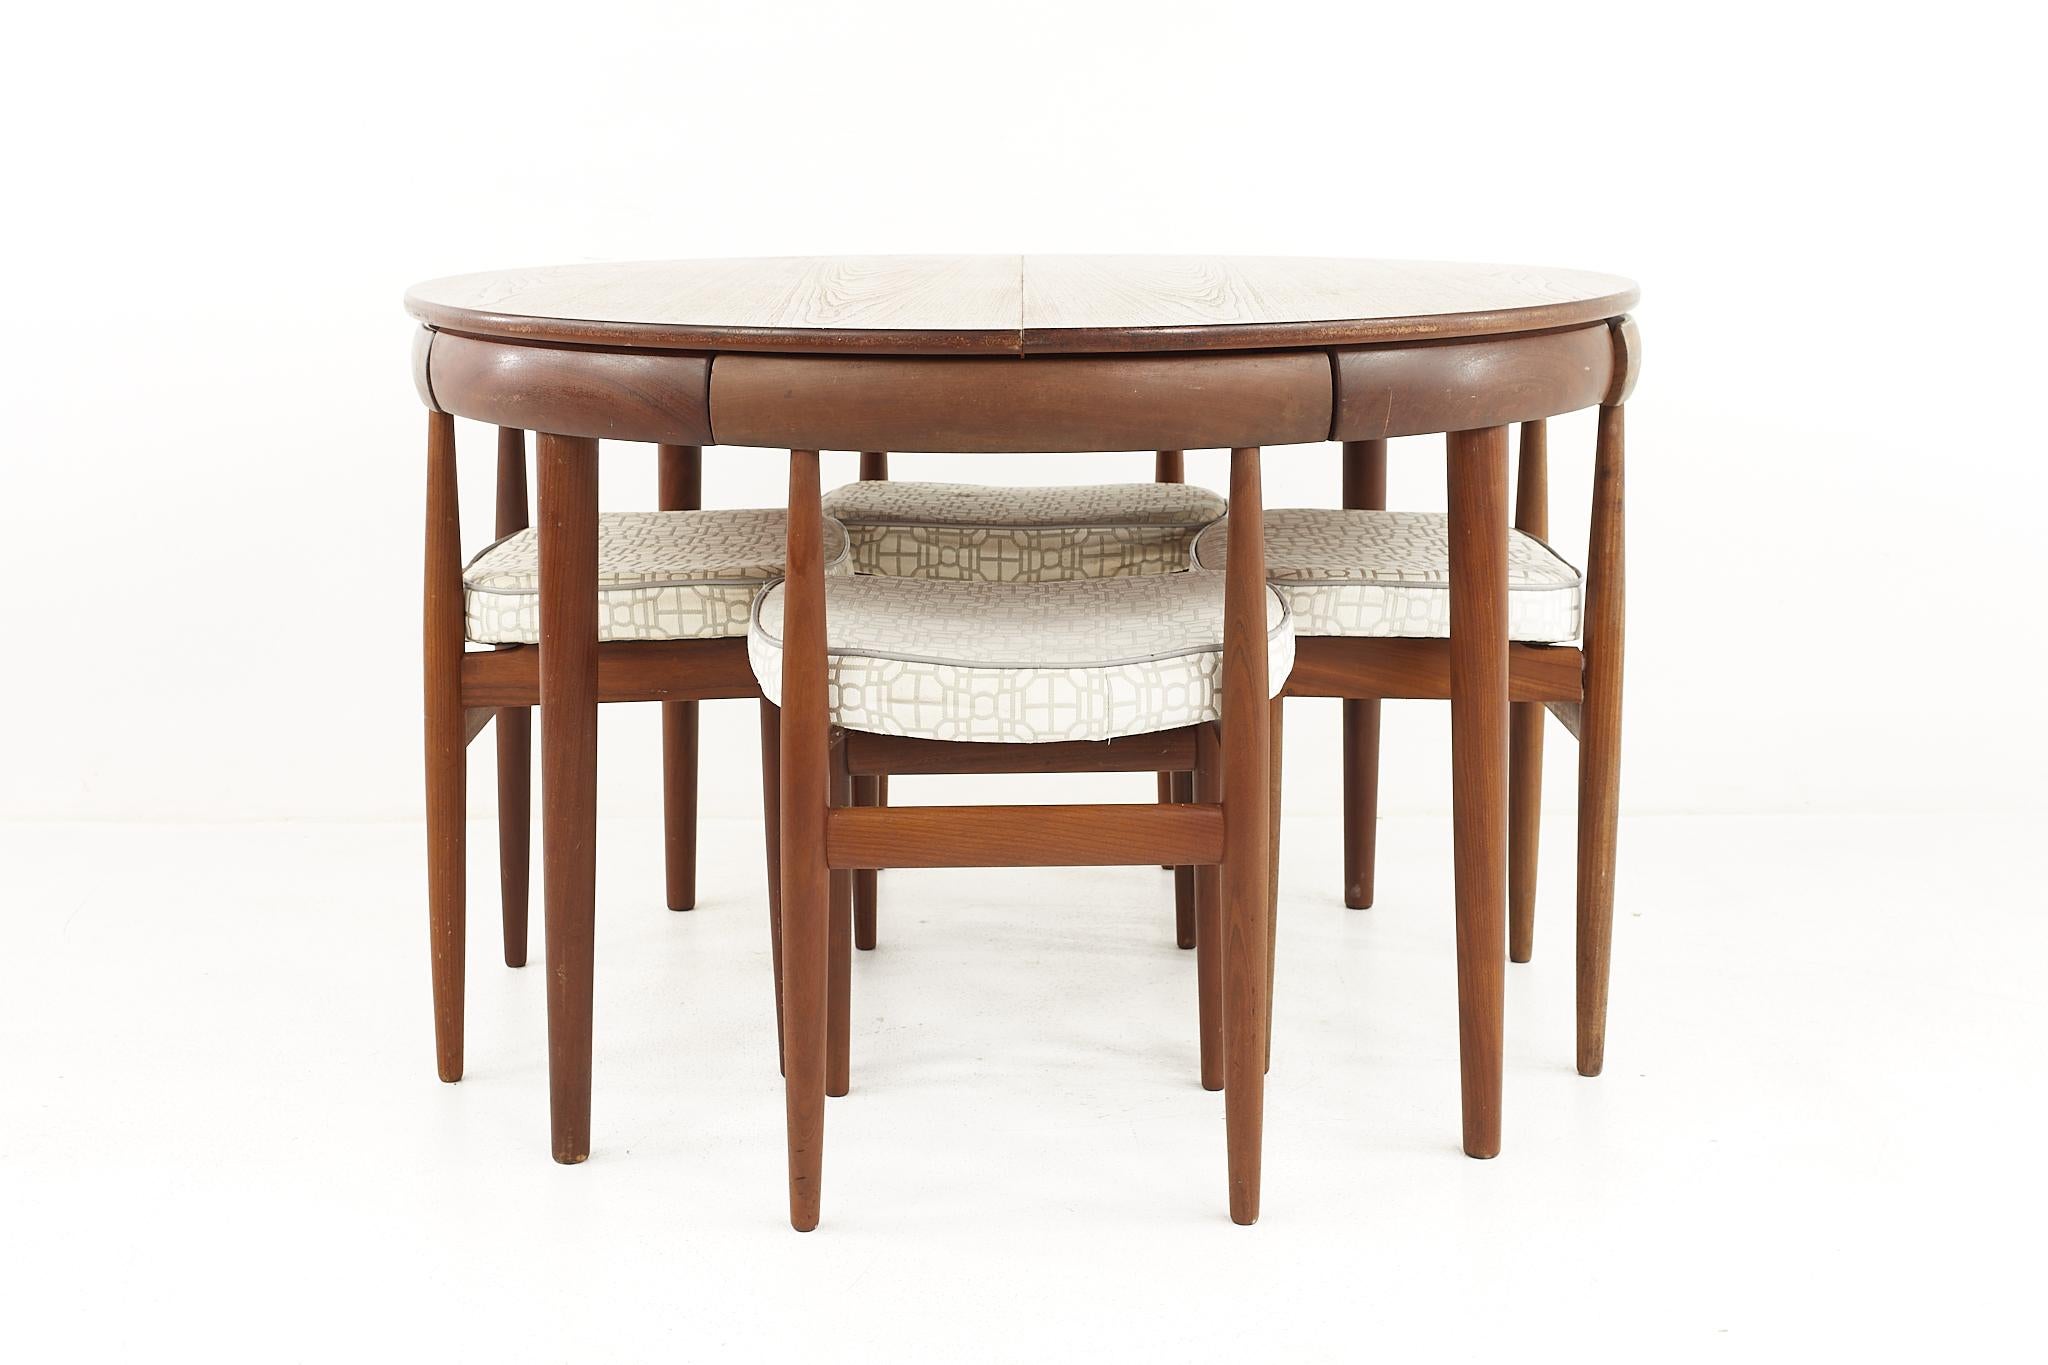 Hans Olsen for Frem Rojle Mid Century Teak Dining Table with Nesting Chairs - Set of 4

The table measures: 47 wide x 47 deep x 29.25 high, with a chair clearance of 26.5 inches; the leaf is 20 inches wide, making a maximum table width of 67